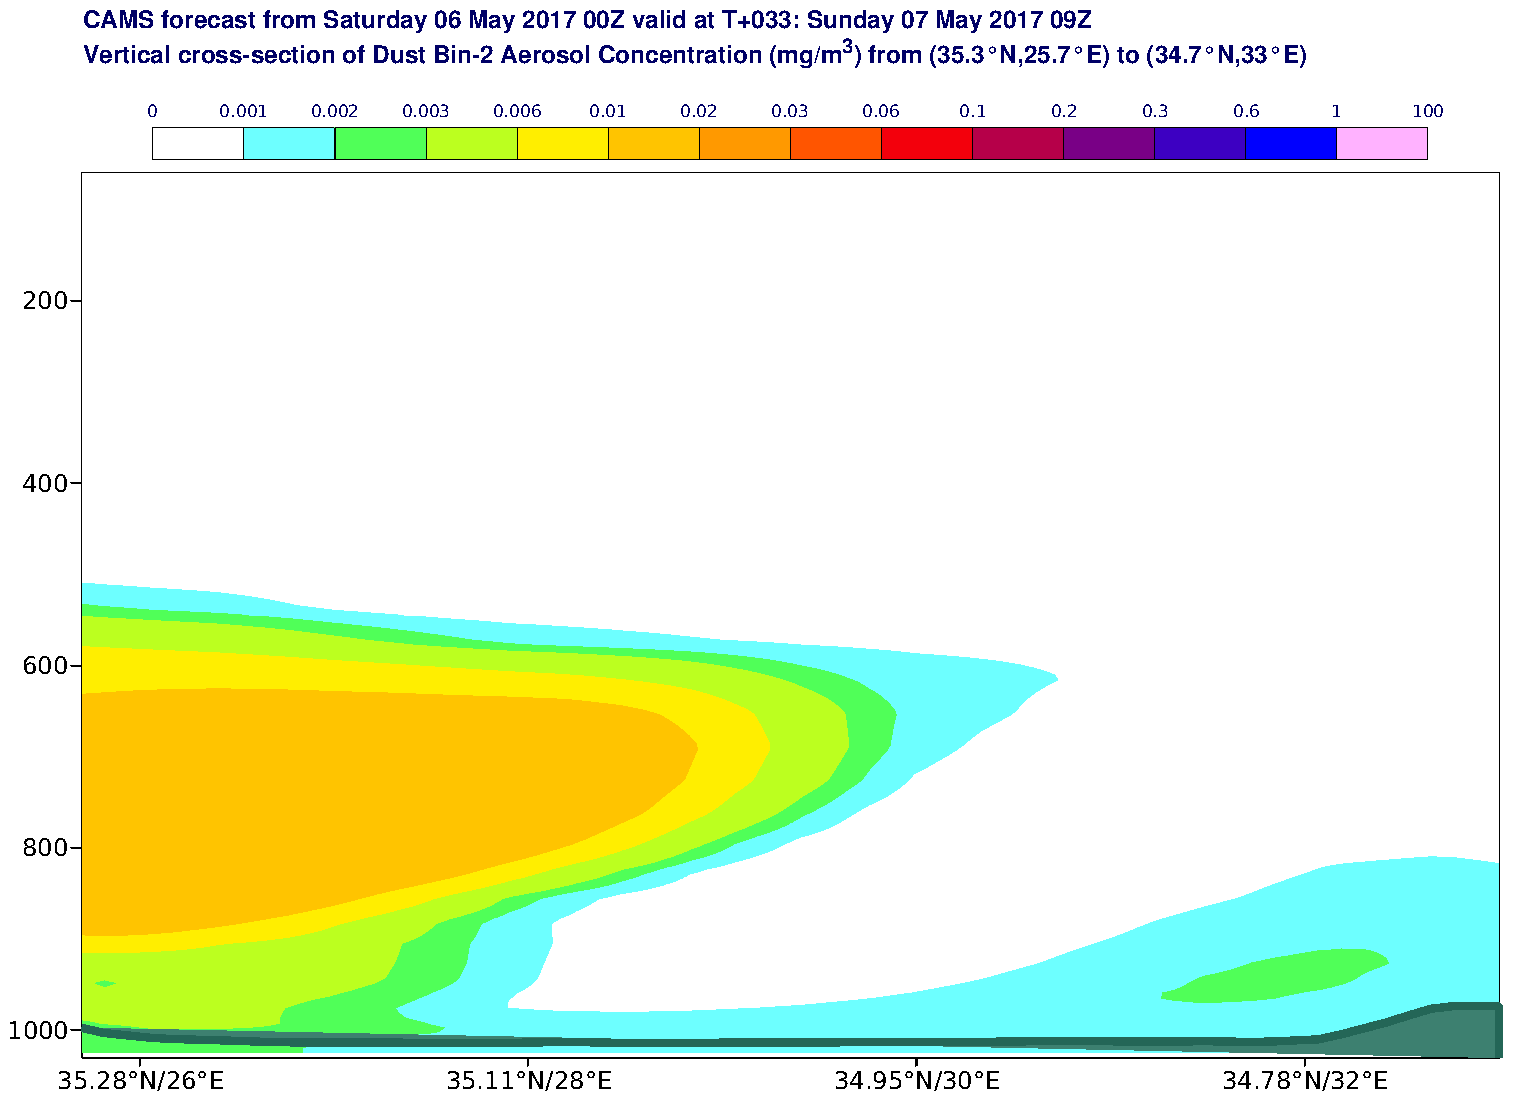 Vertical cross-section of Dust Bin-2 Aerosol Concentration (mg/m3) valid at T33 - 2017-05-07 09:00